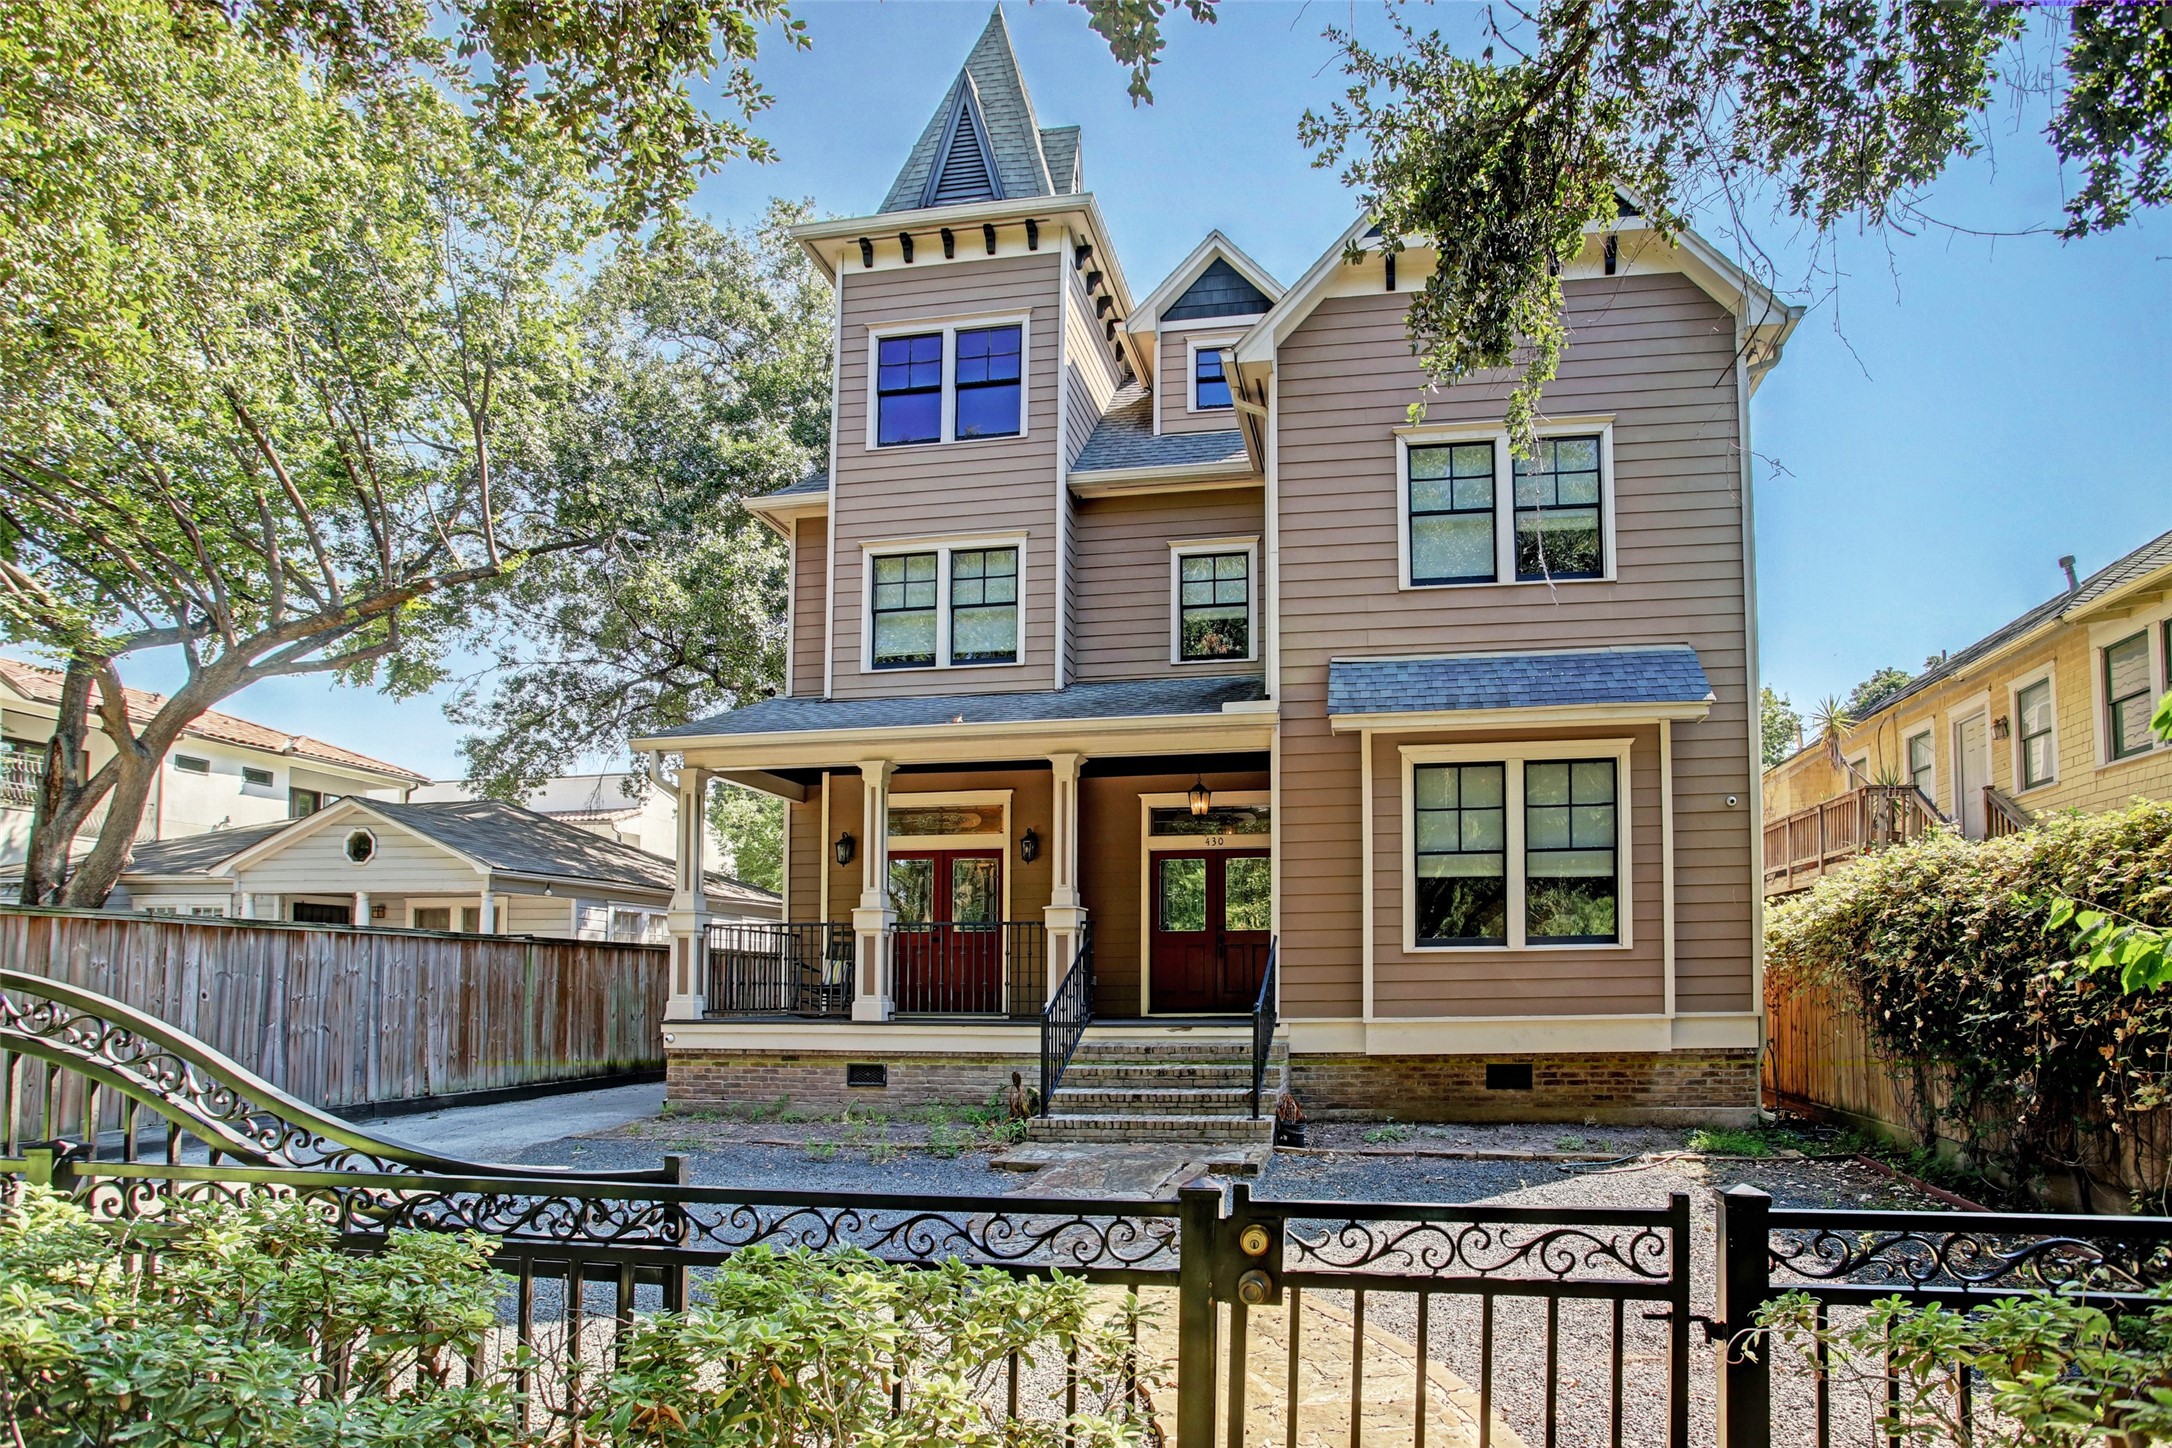 430 Heights Boulevard is a classic Houston Heights home with Commercial and/or Residential use possibility.